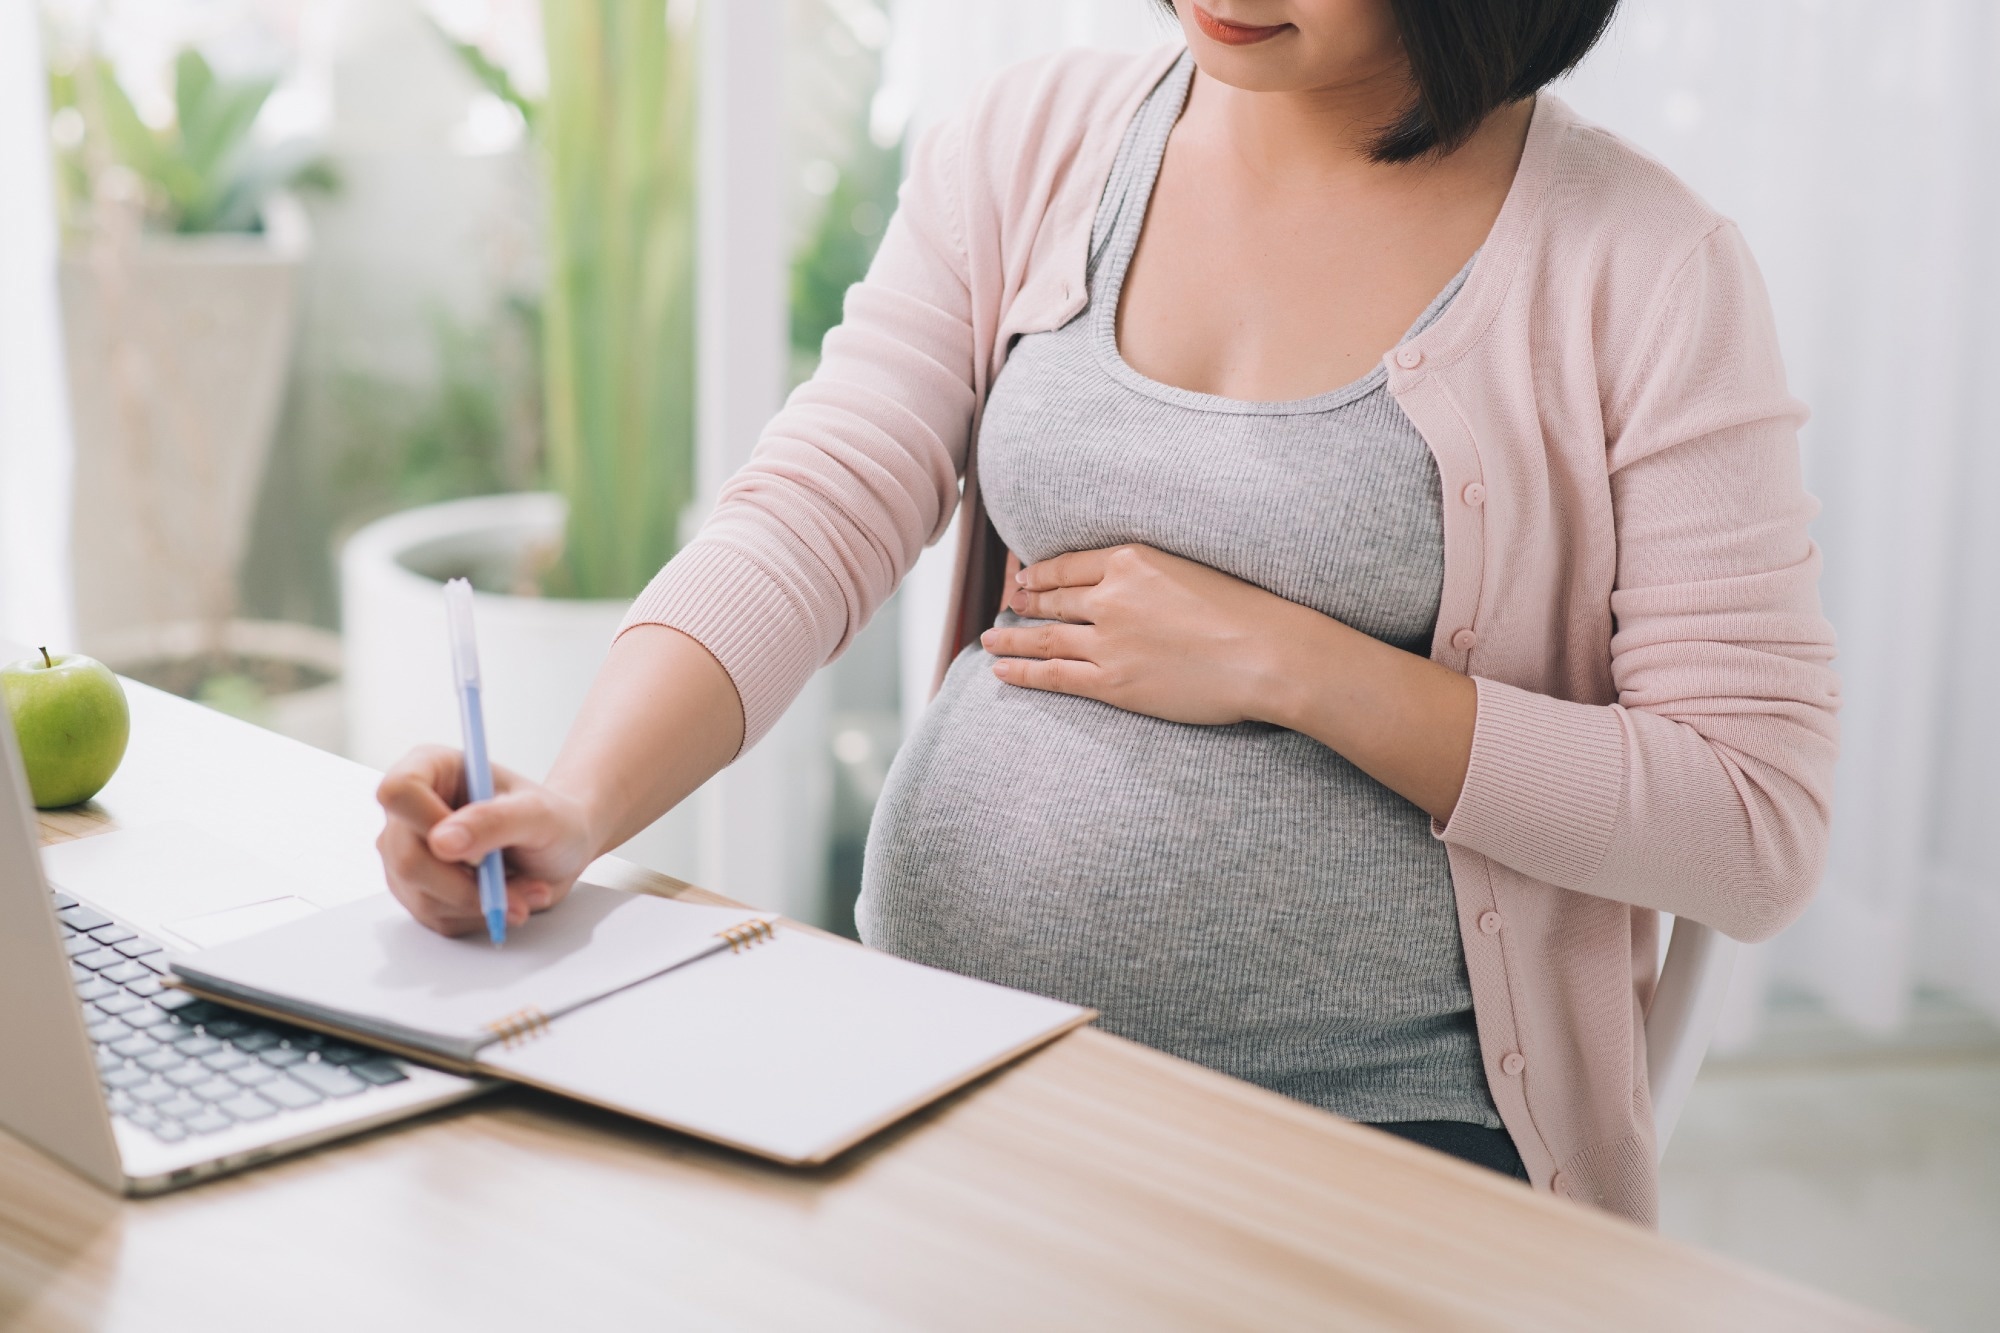 Study: Association of Early Pregnancy Perfluoroalkyl and Polyfluoroalkyl Substance Exposure With Birth Outcomes. Image Credit: Makistock/Shutterstock.com